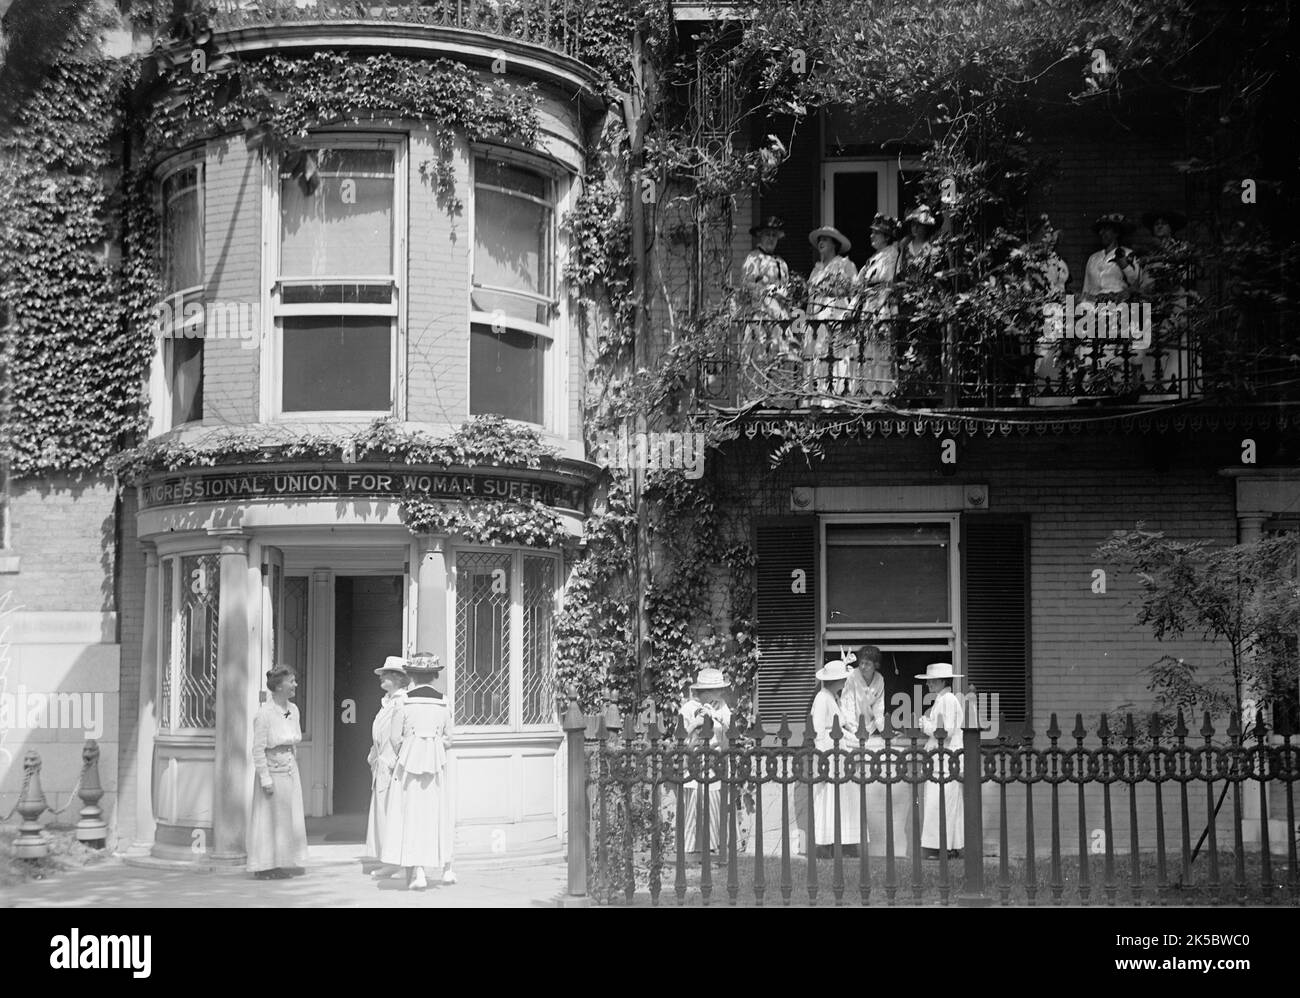 Cameron House, Later Part of Cosmos Club - Woman Suffrage, 1915. [Cameron House in Washington, DC, the offices of the Congressional Union for Woman Suffrage. Women in the United States gained the legal right to vote in 1920, with the passing of the 19th Amendment]. Stock Photo